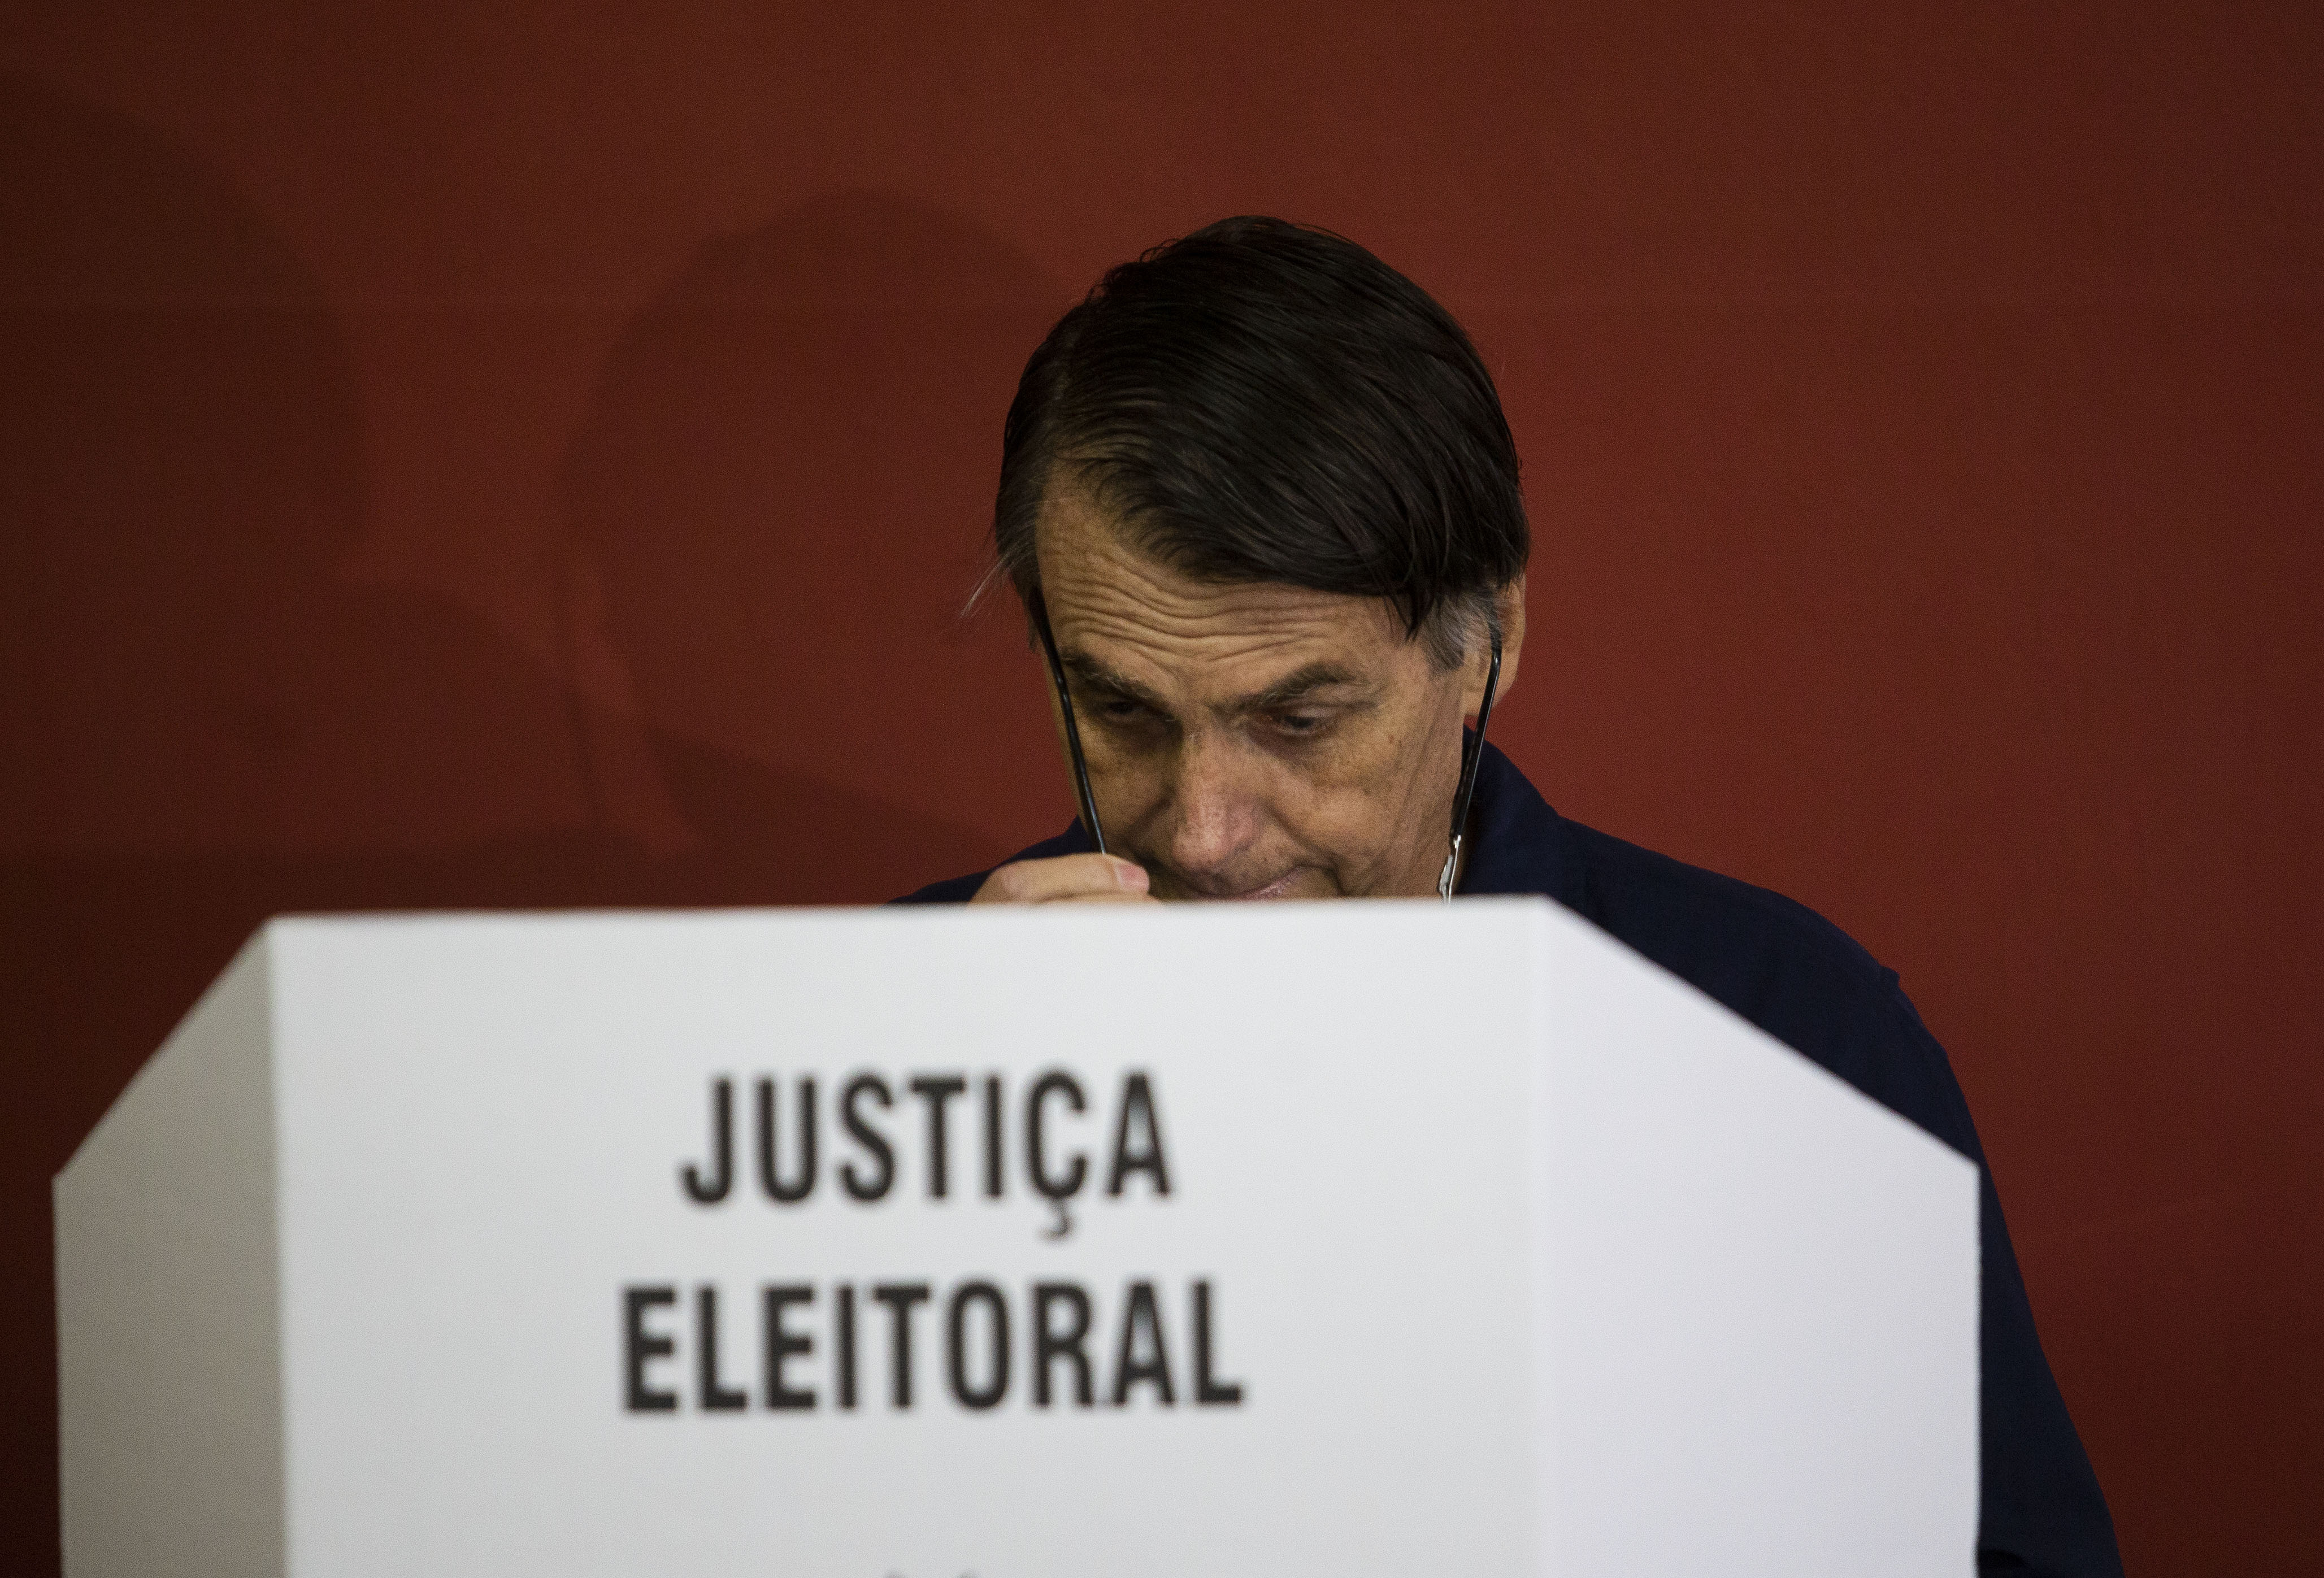 Brazil far-right candidate, Bolsonaro, ahead after first round in presidential elections